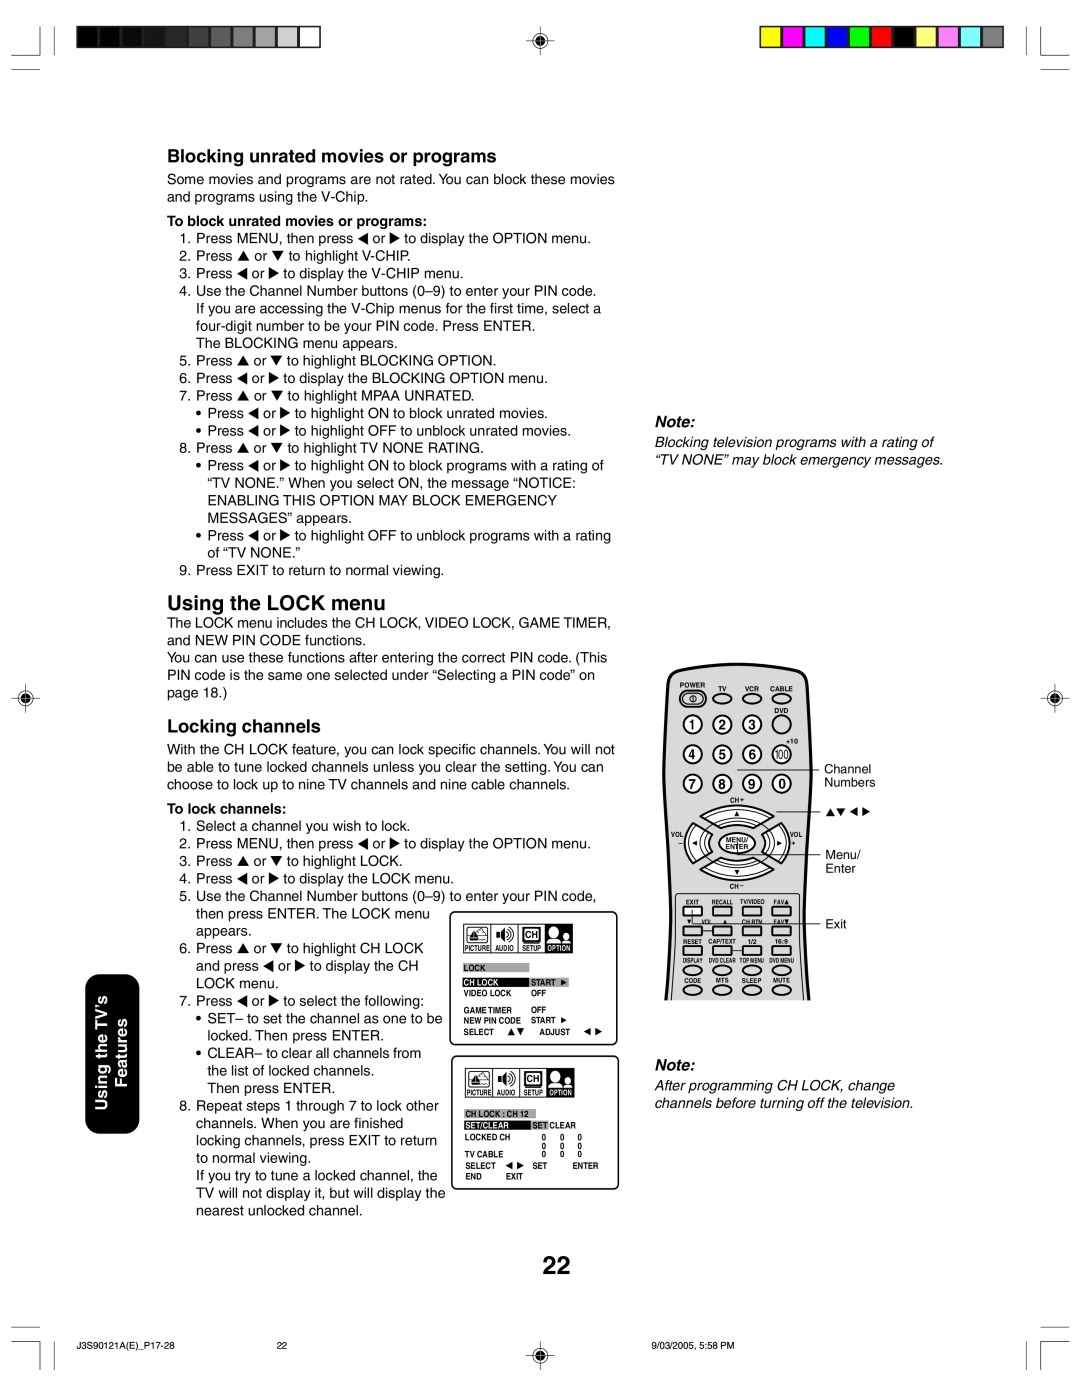 Toshiba 32AF45 appendix Using the LOCK menu, Blocking unrated movies or programs, Locking channels, Using the TV’s Features 